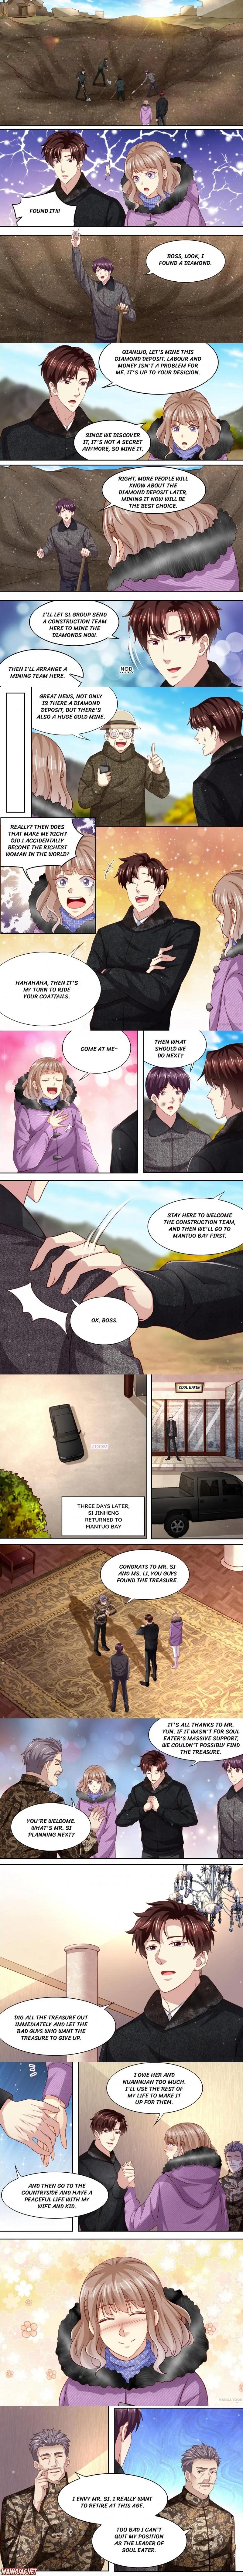 An Exorbitant Wife - Page 1